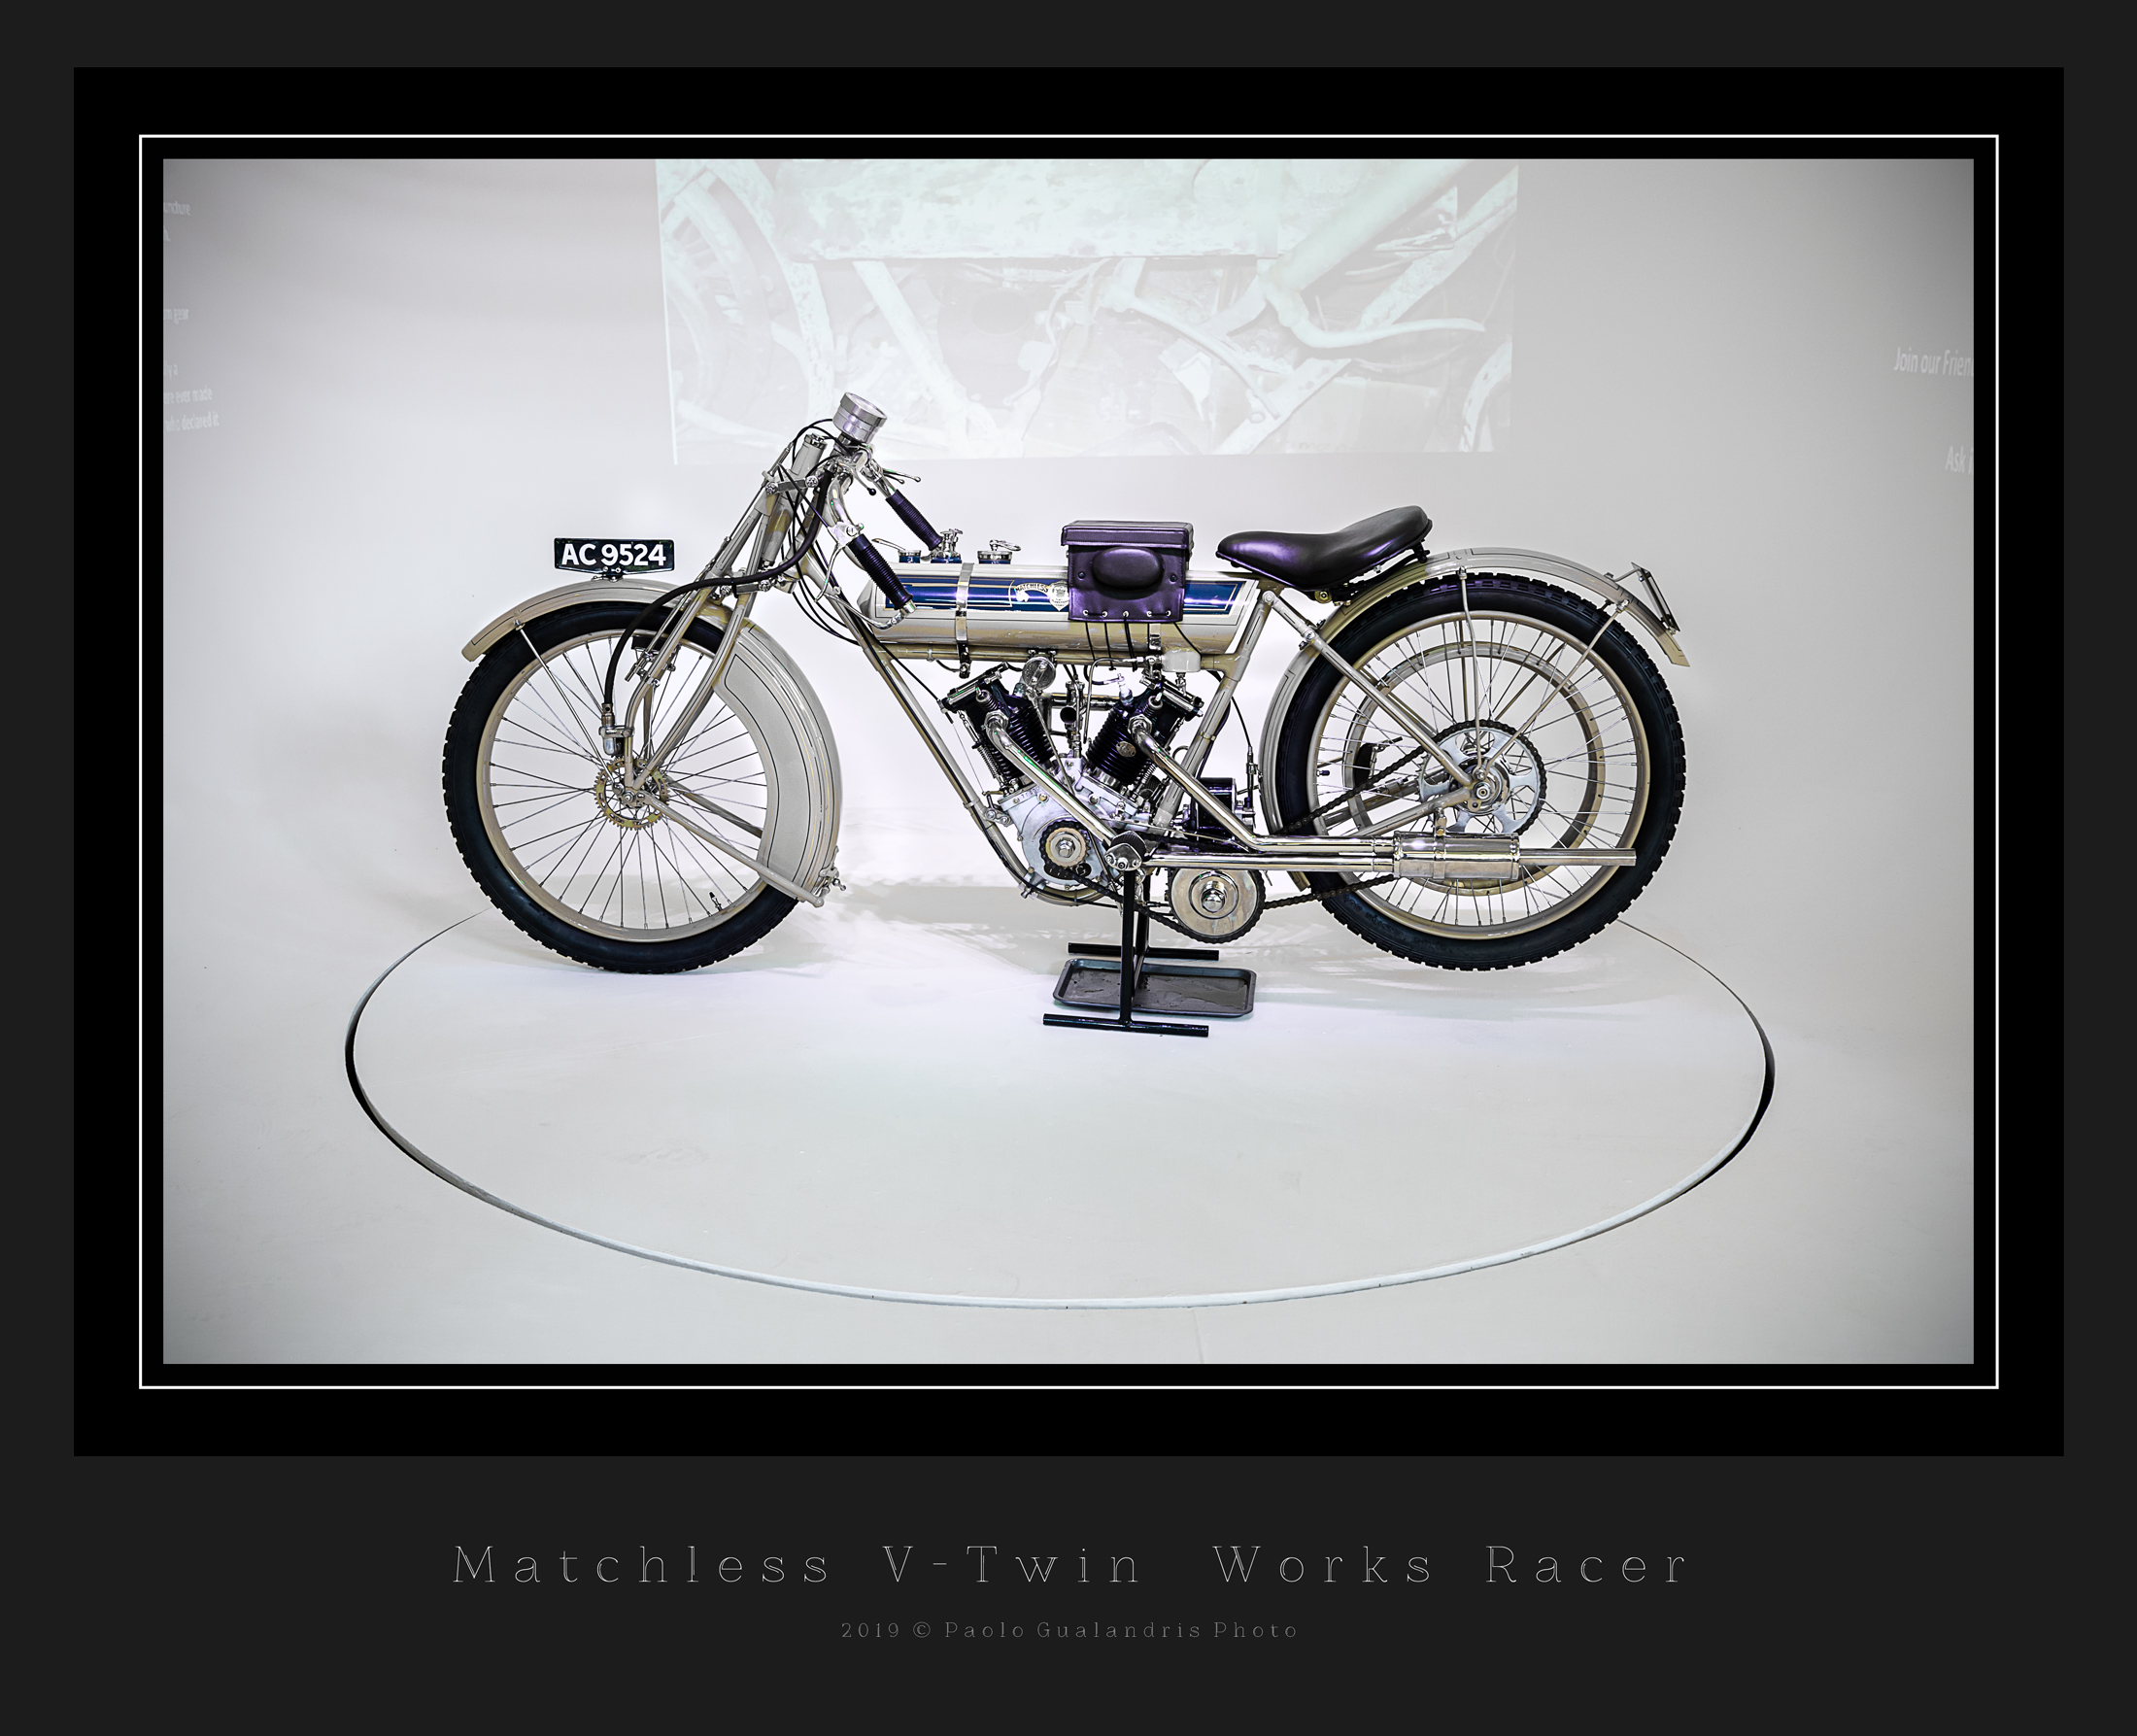 Matchless V-Twin Works Racer...